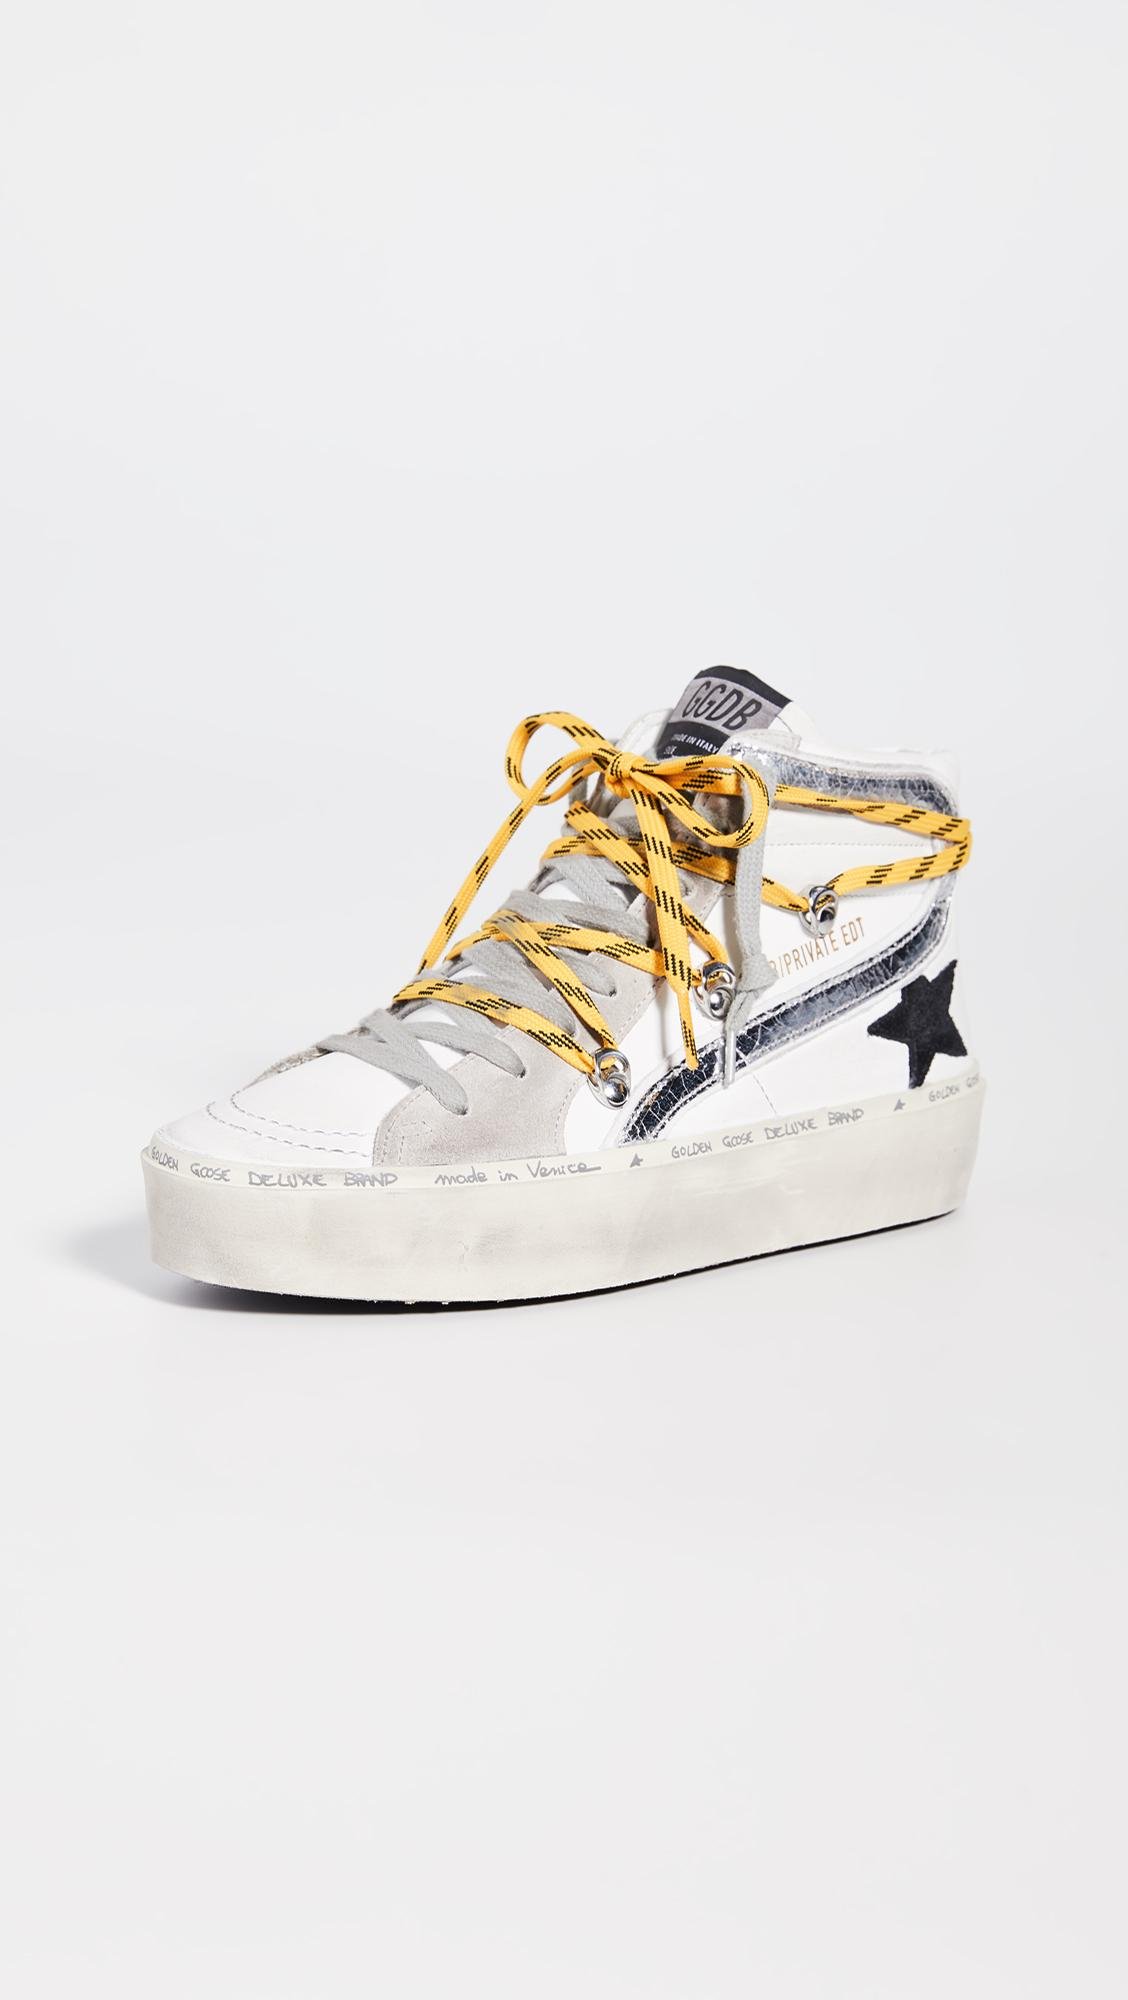 Golden Goose Leather Hi Slide Sneakers in White Yellow (White) - Lyst